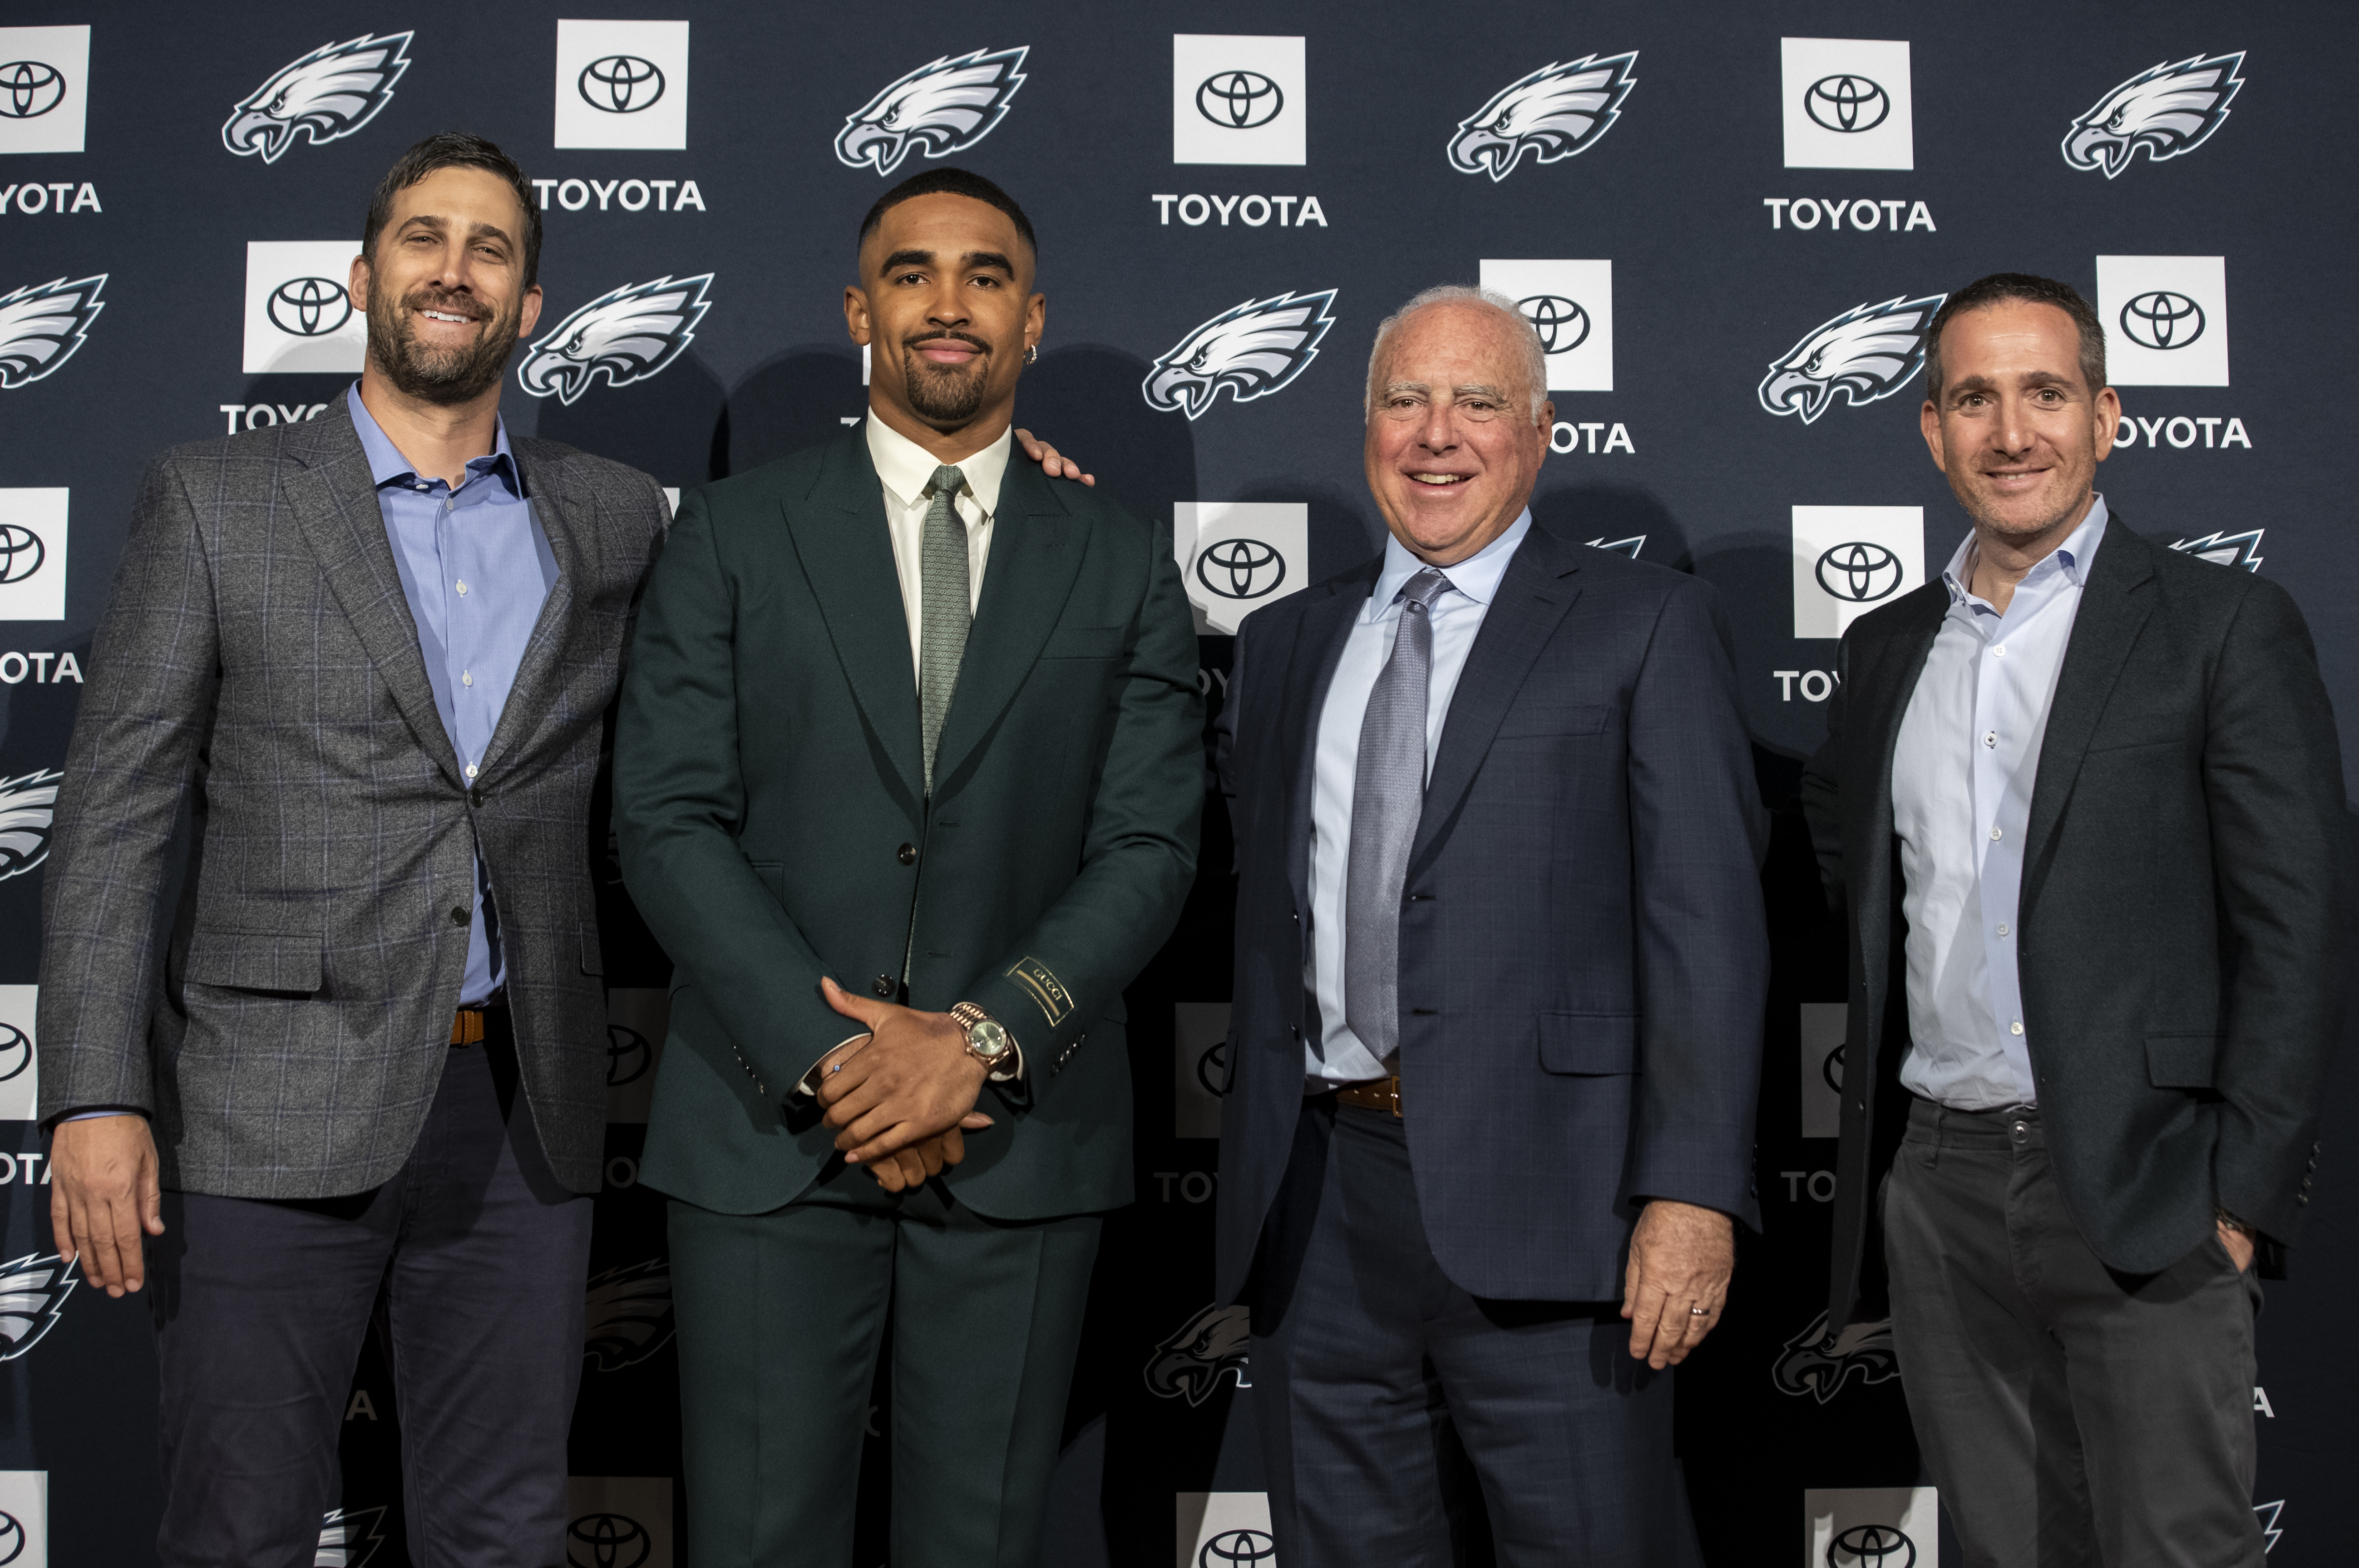 Nick Sirianni's meeting with Eagles owner Jeffrey Lurie scheduled for Friday